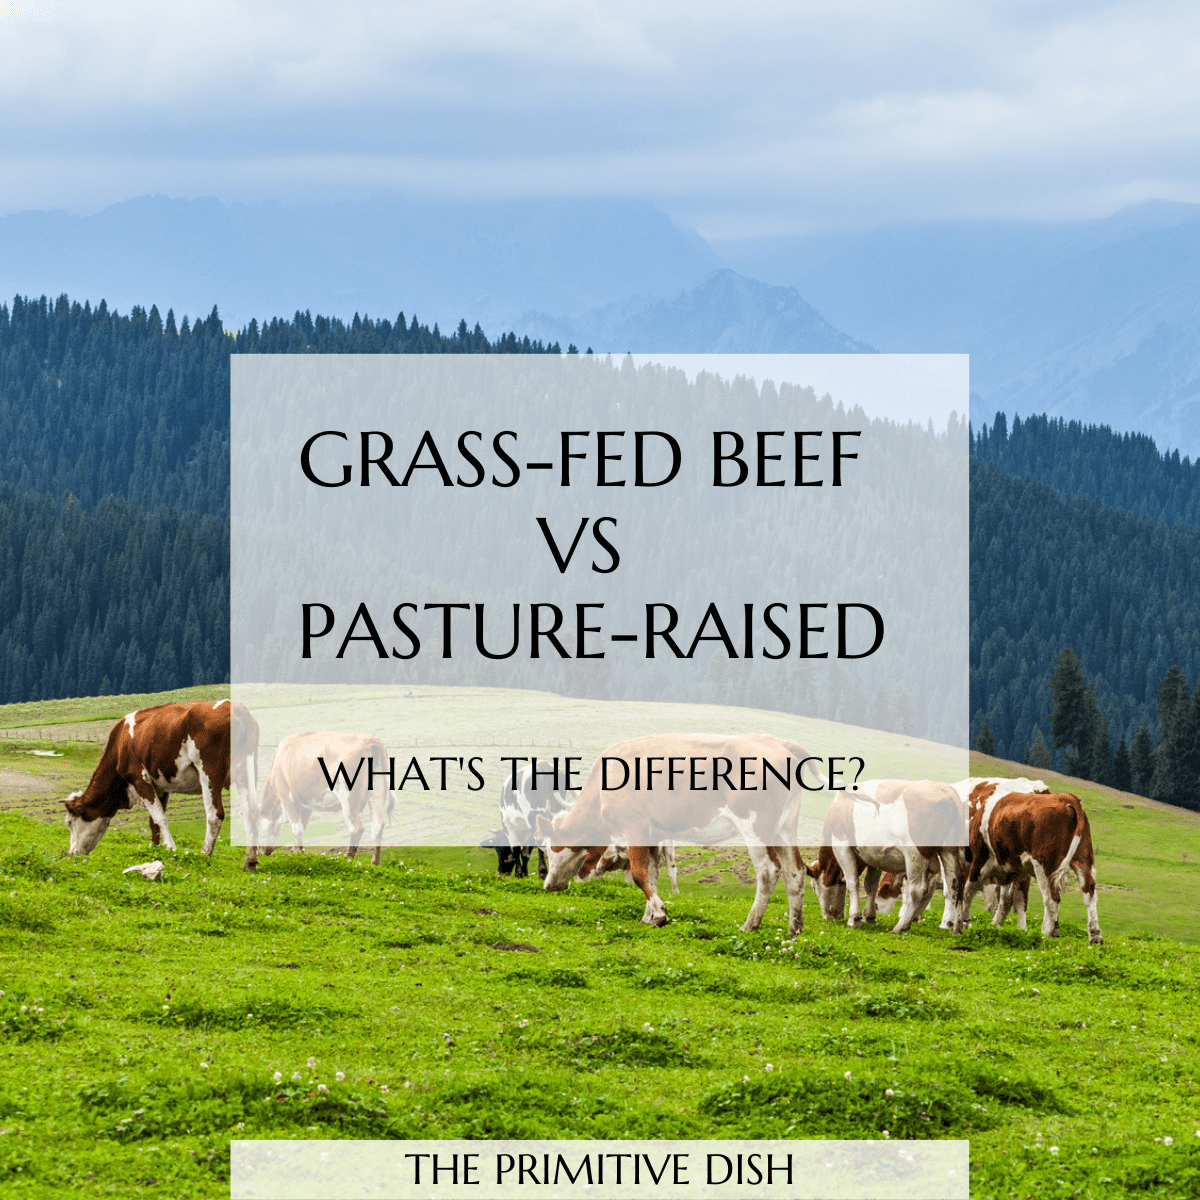 Cows grazing in a pasture with a text overlay reading grass-fed beef vs pasture-raised beef.